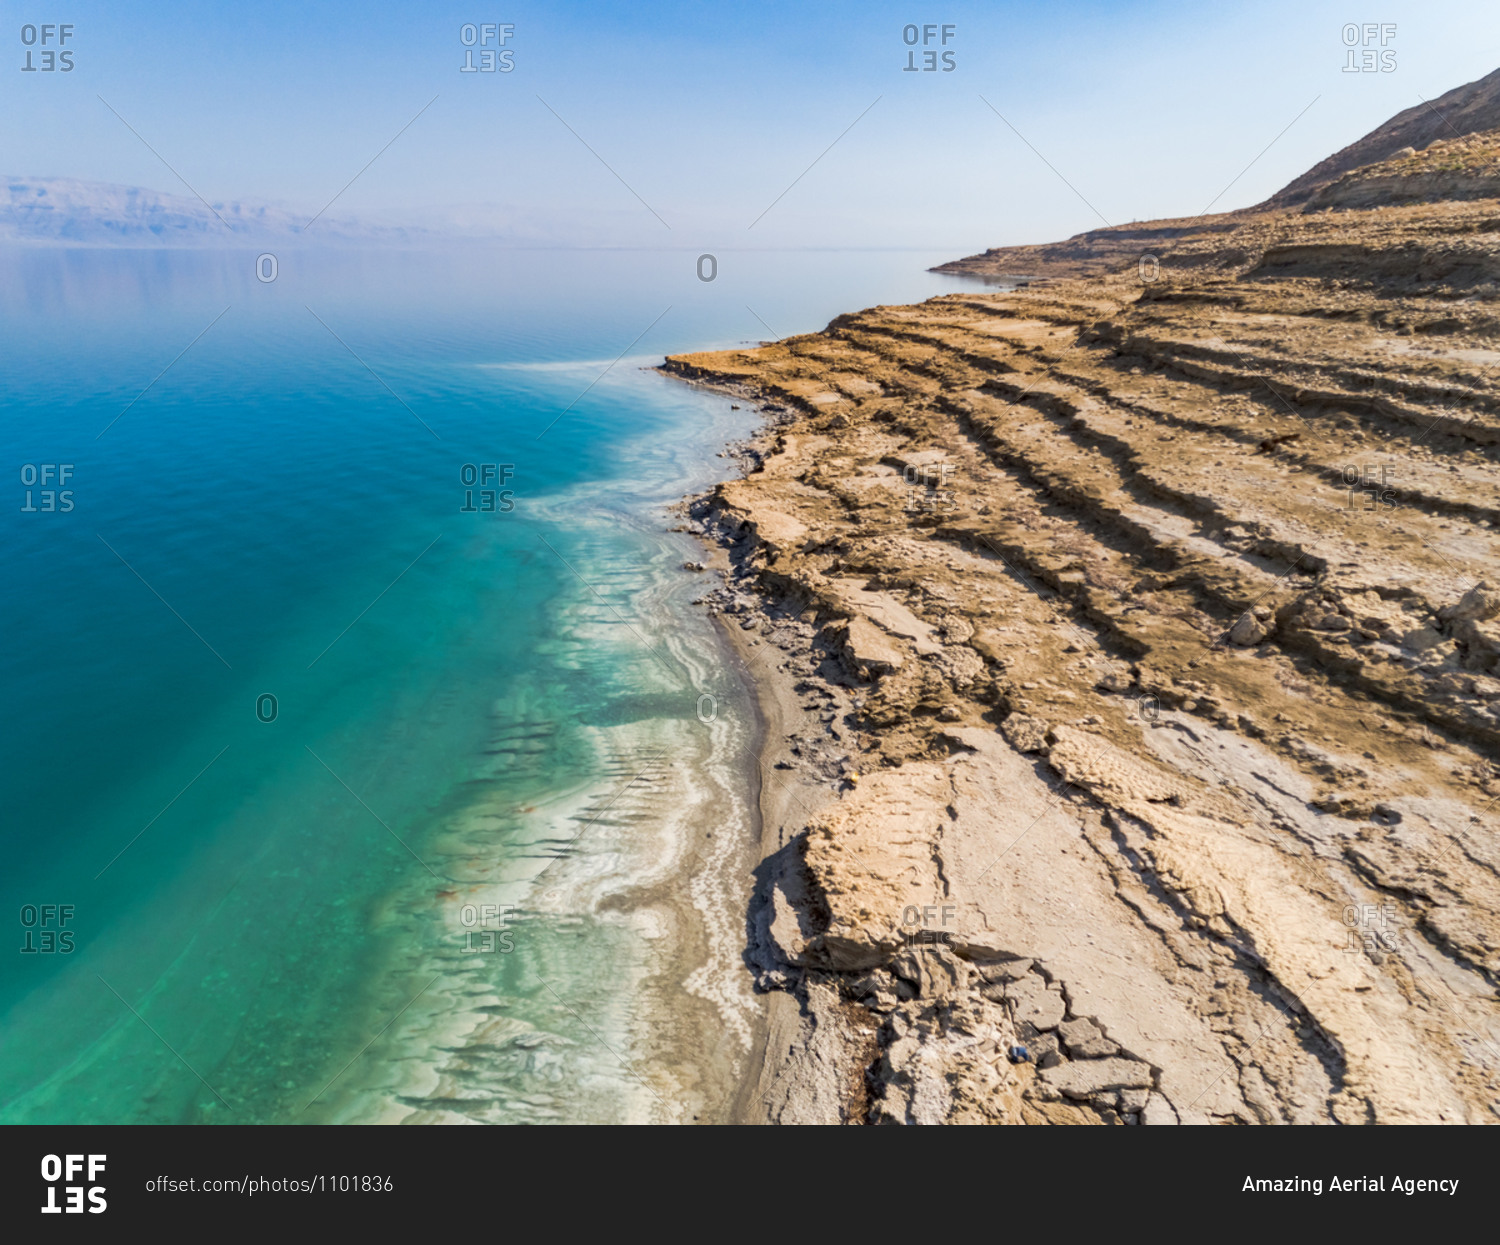 Aerial view of the Dead sea and its growing shoreline as the water level drop rapidly. Jordan Rift Valley, Israel.